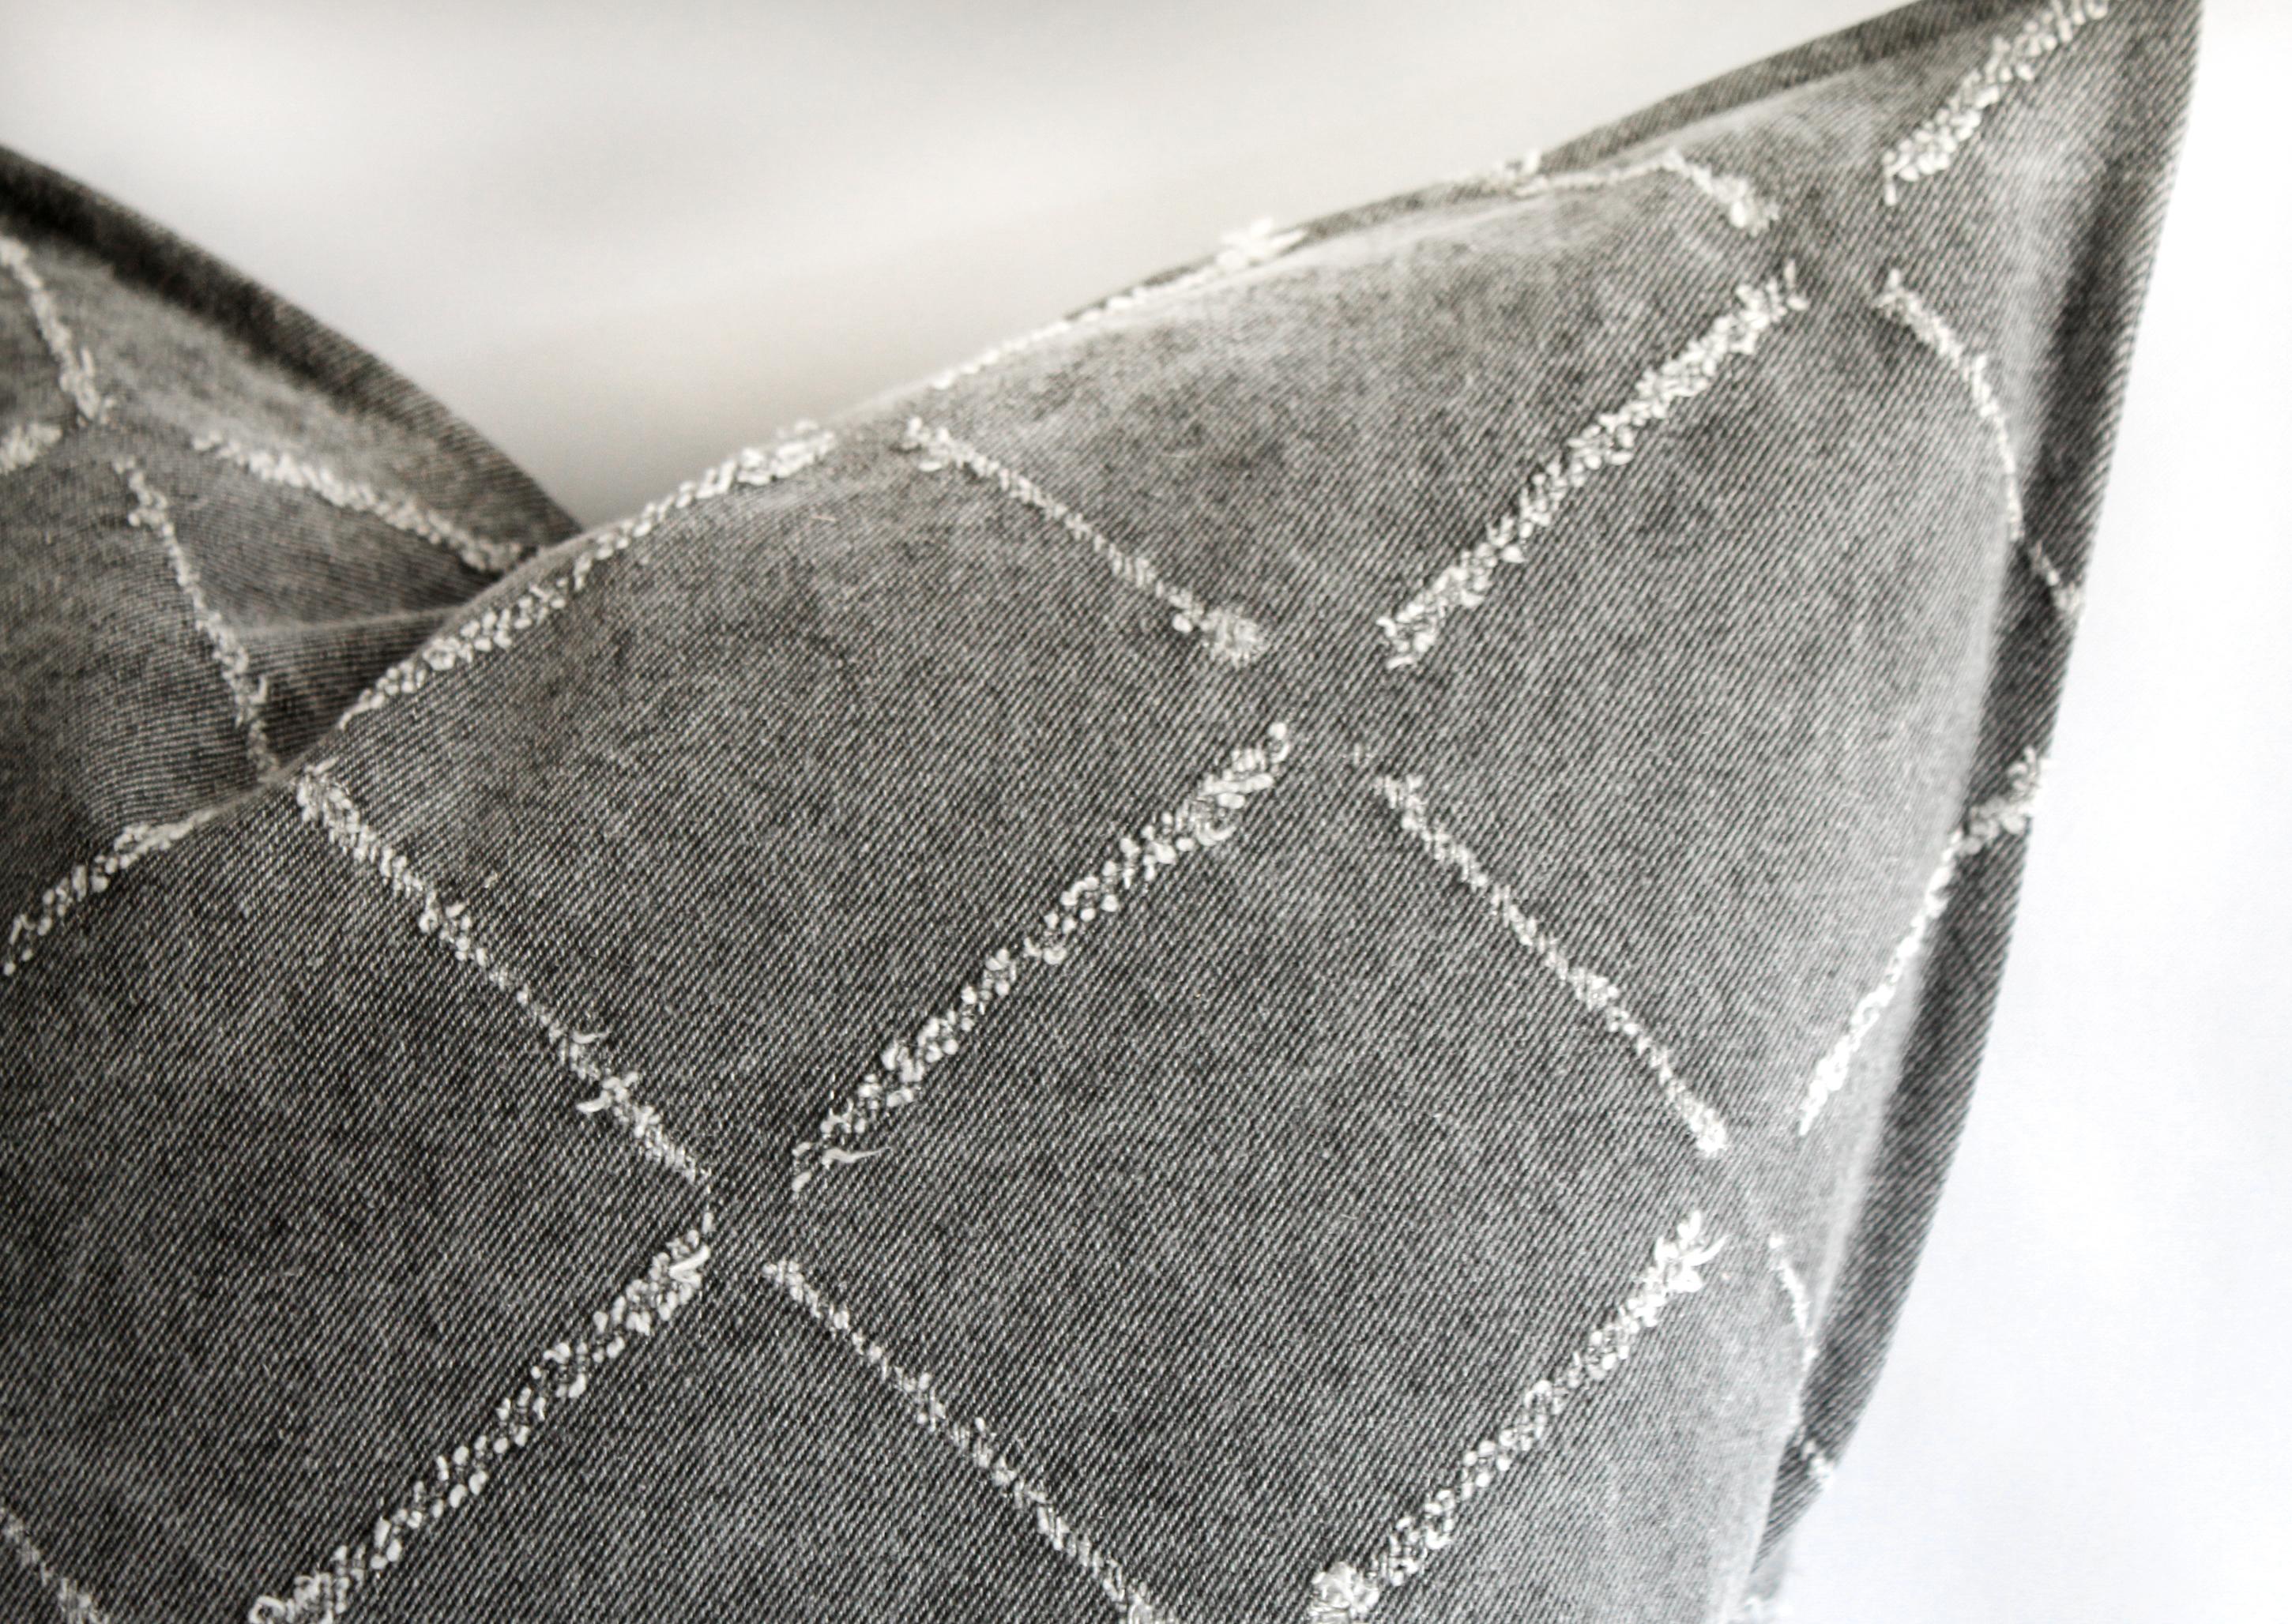 Gray stone washed linen pillows with diamond frayed details
Double sided pillow features a diamond frayed stonewash finish, while the other side features a frayed square detail. 100% linen, zipper closure and sewn overlocked edge. Machine washable,